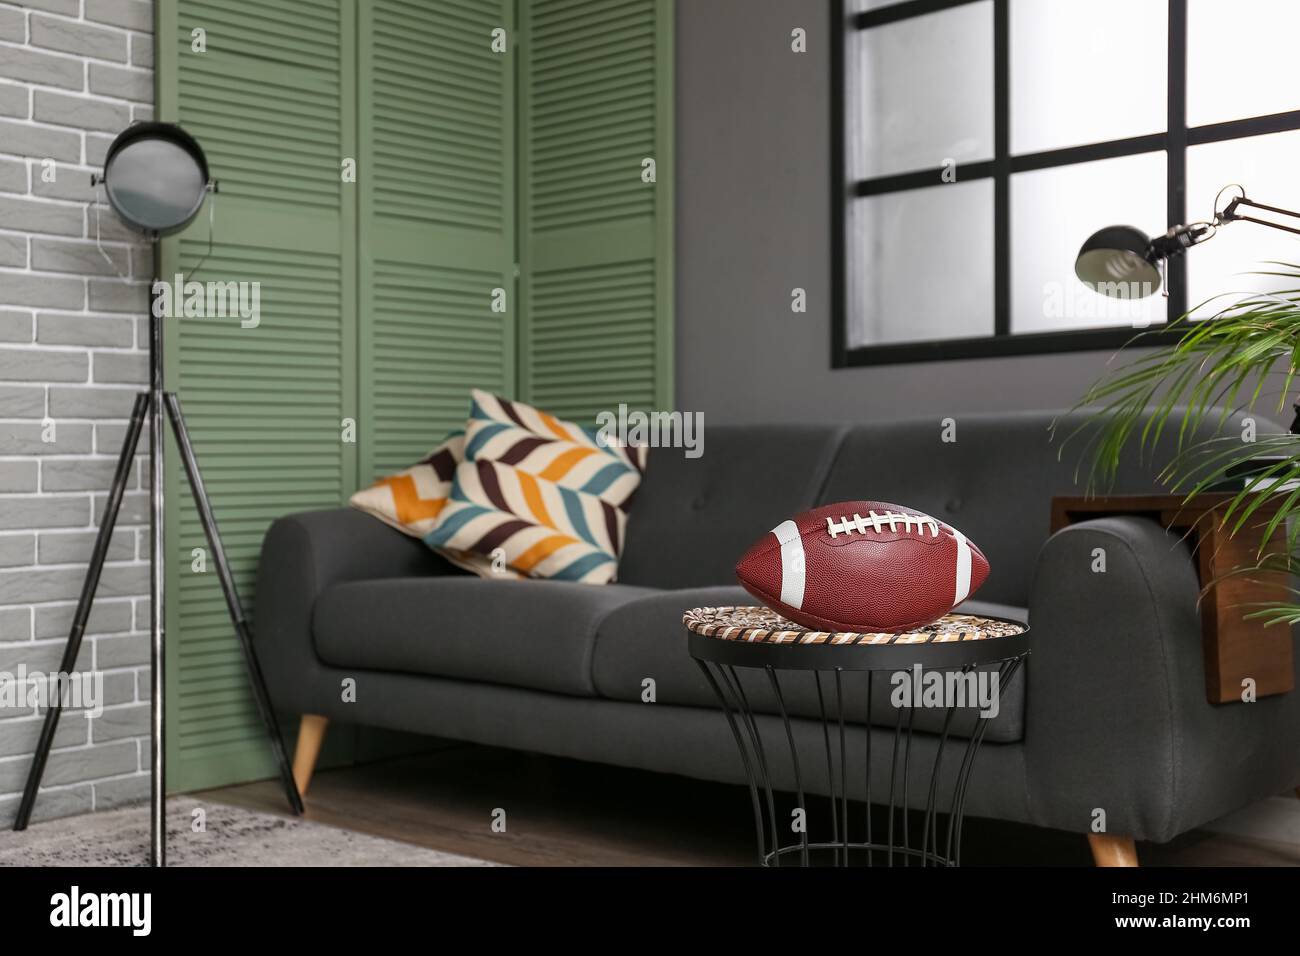 Rugby ball in interior of modern living room Stock Photo